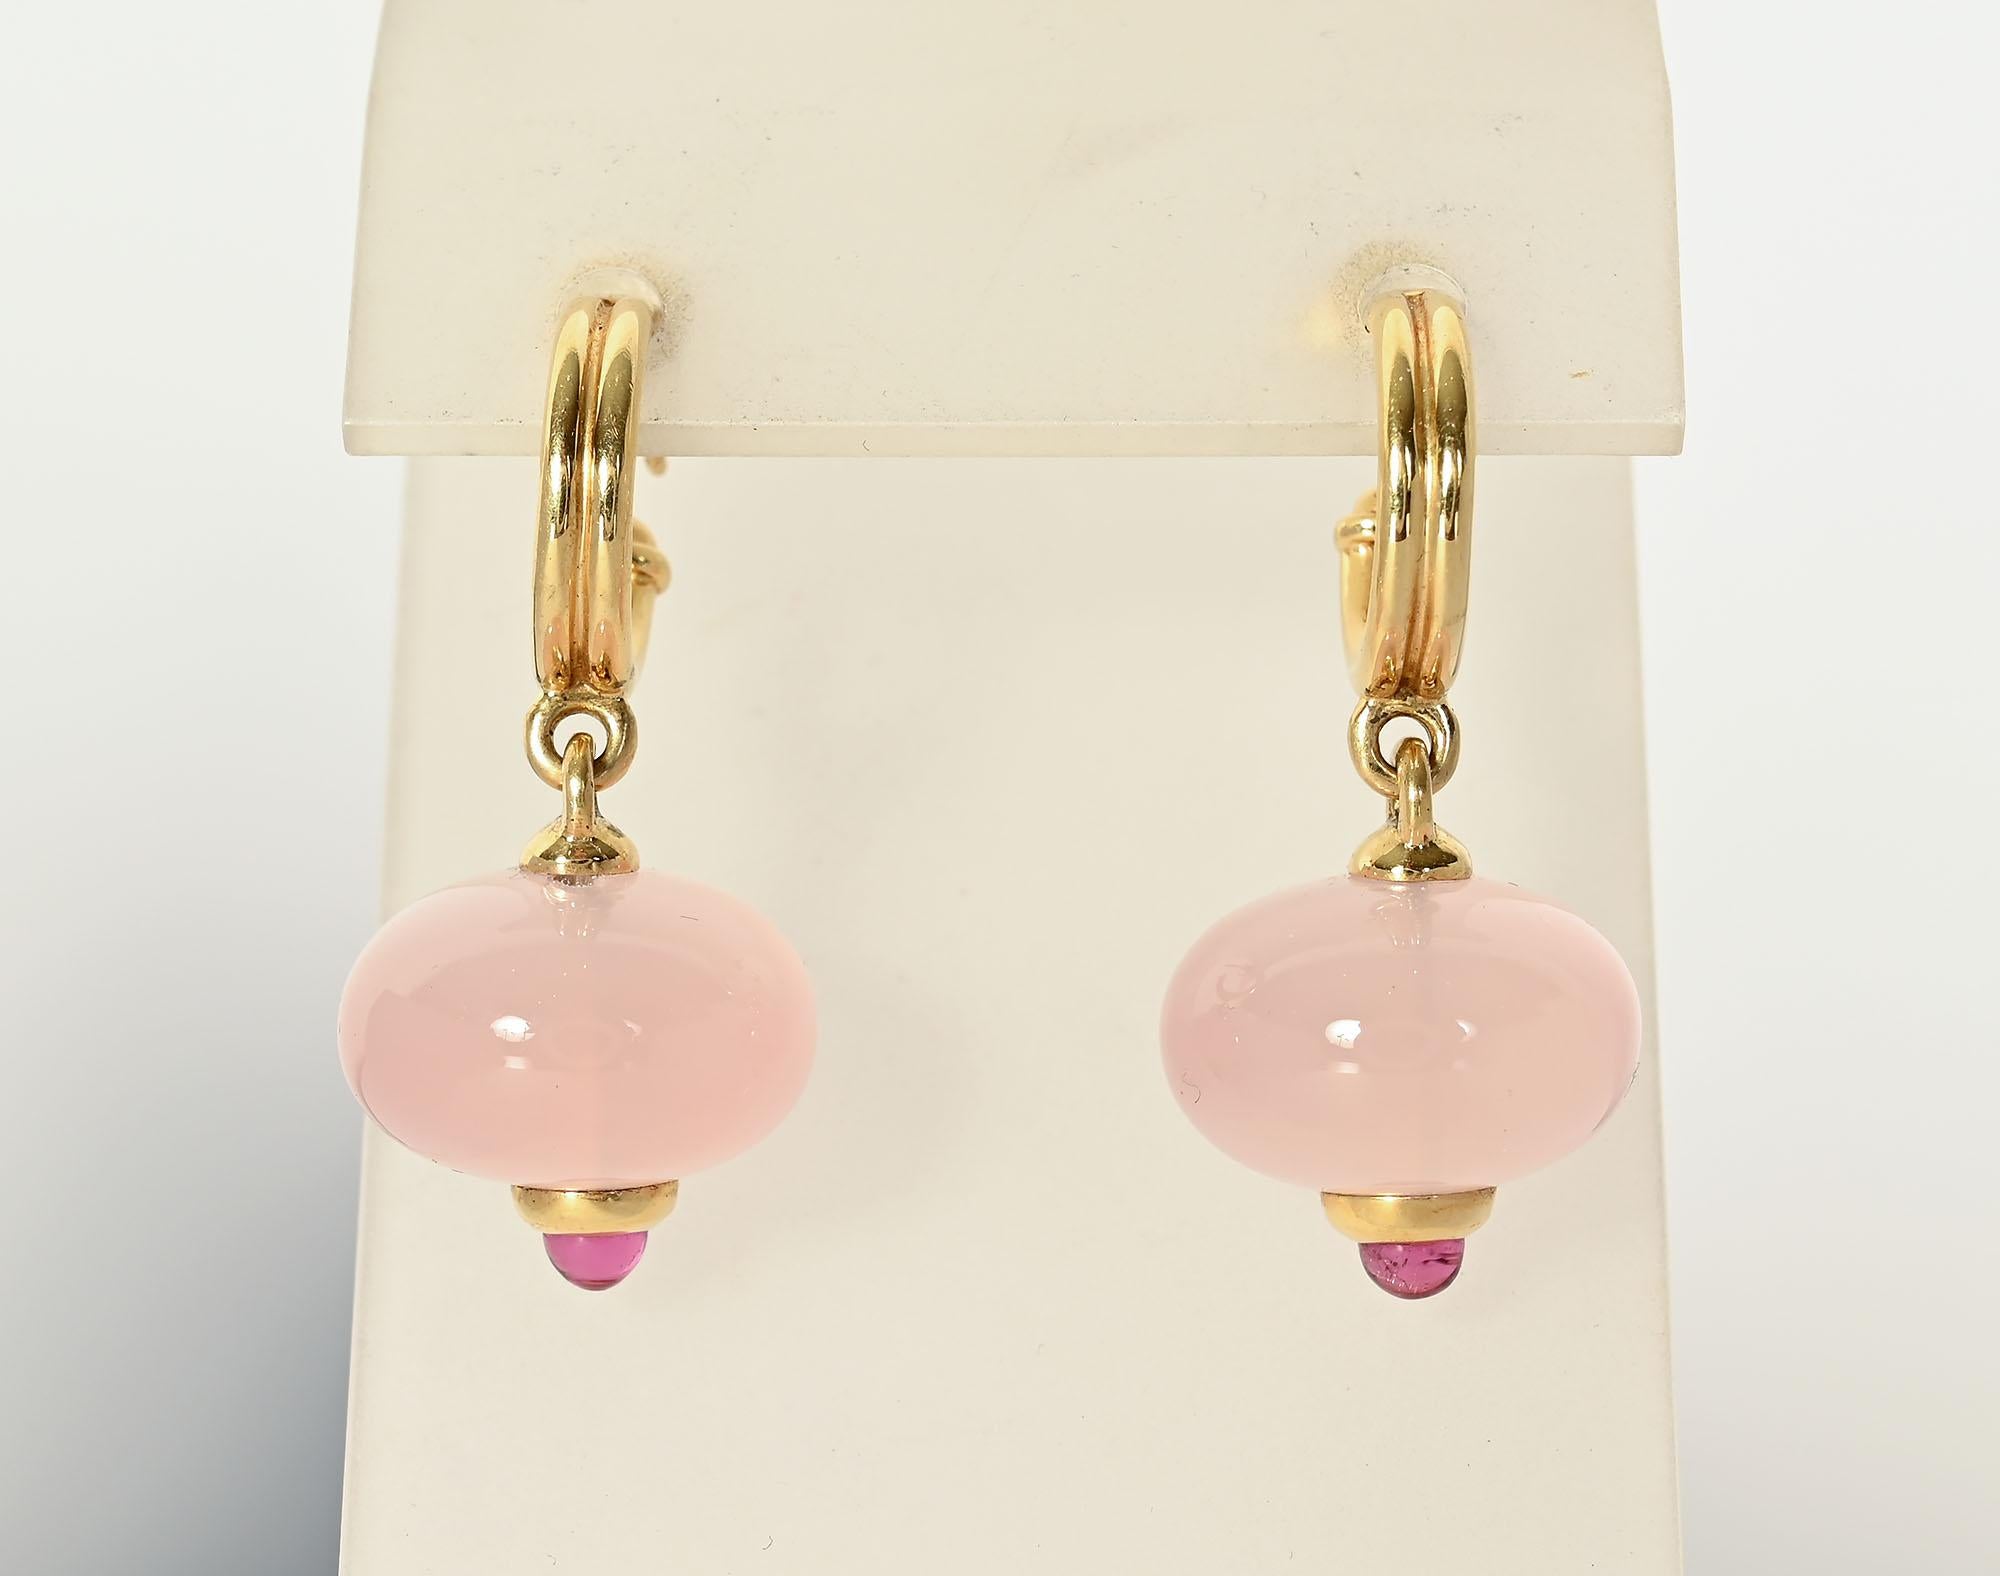 Rose quartz balls drop from a double hoop in these lovely earrings by Paloma Picasso. A tourmaline set in a gold collar completes the bottom. Post backs; like new condition. Measurements are 1 1/2